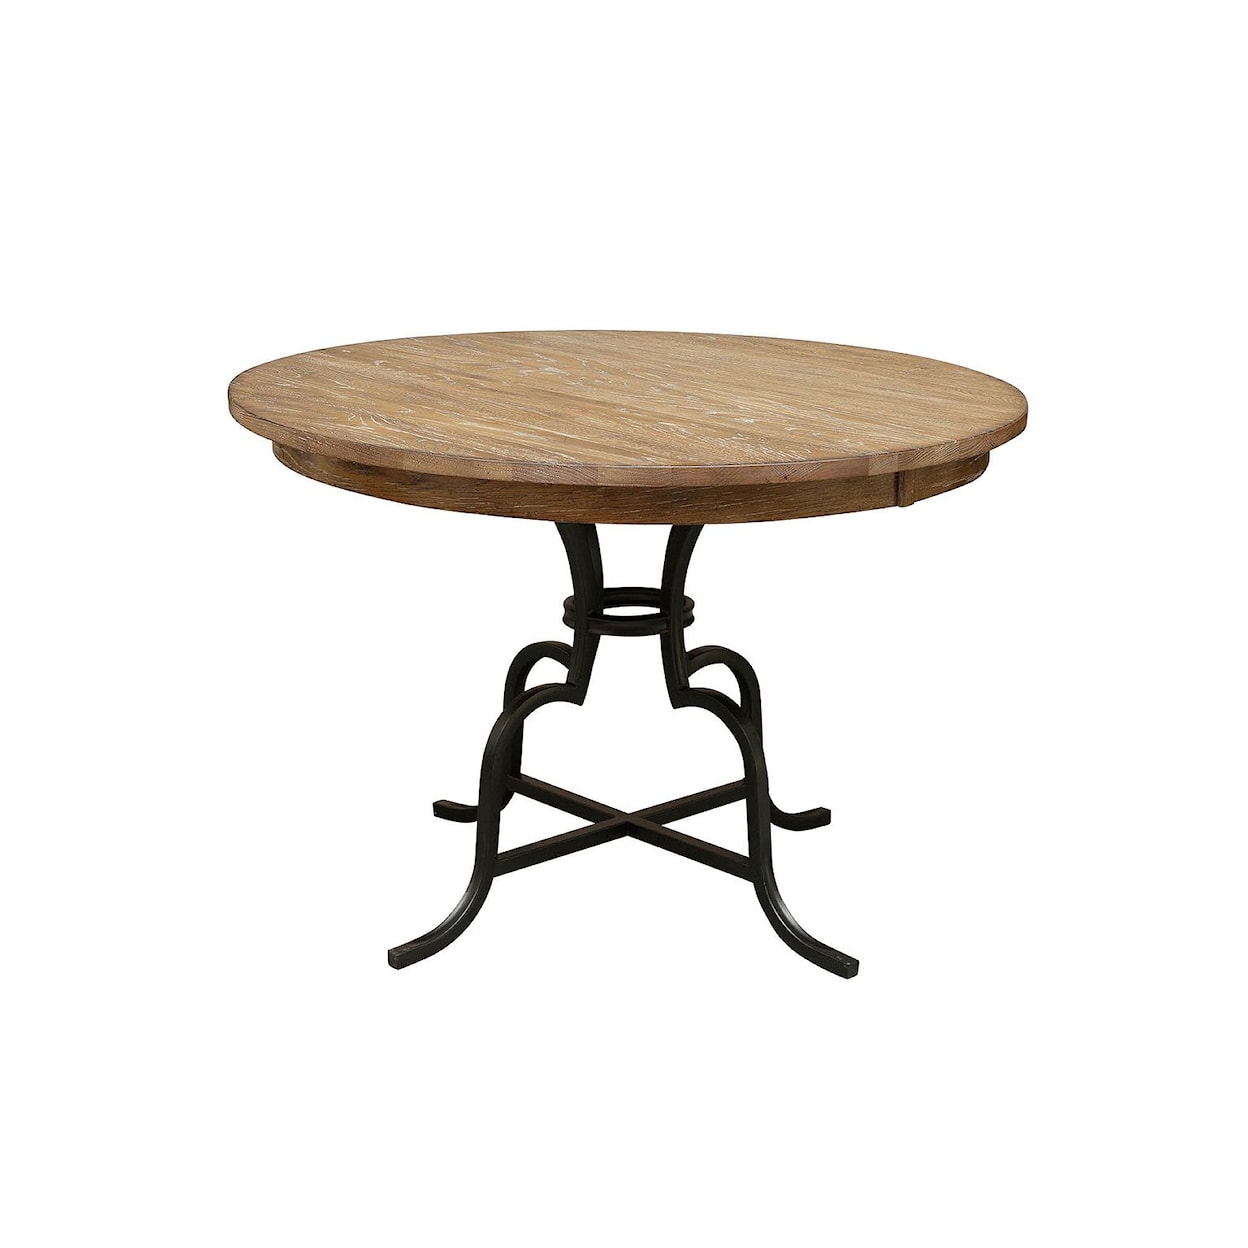 Kincaid Furniture THE NOOK - BRUSHED OAK Counter-Height Dining Table